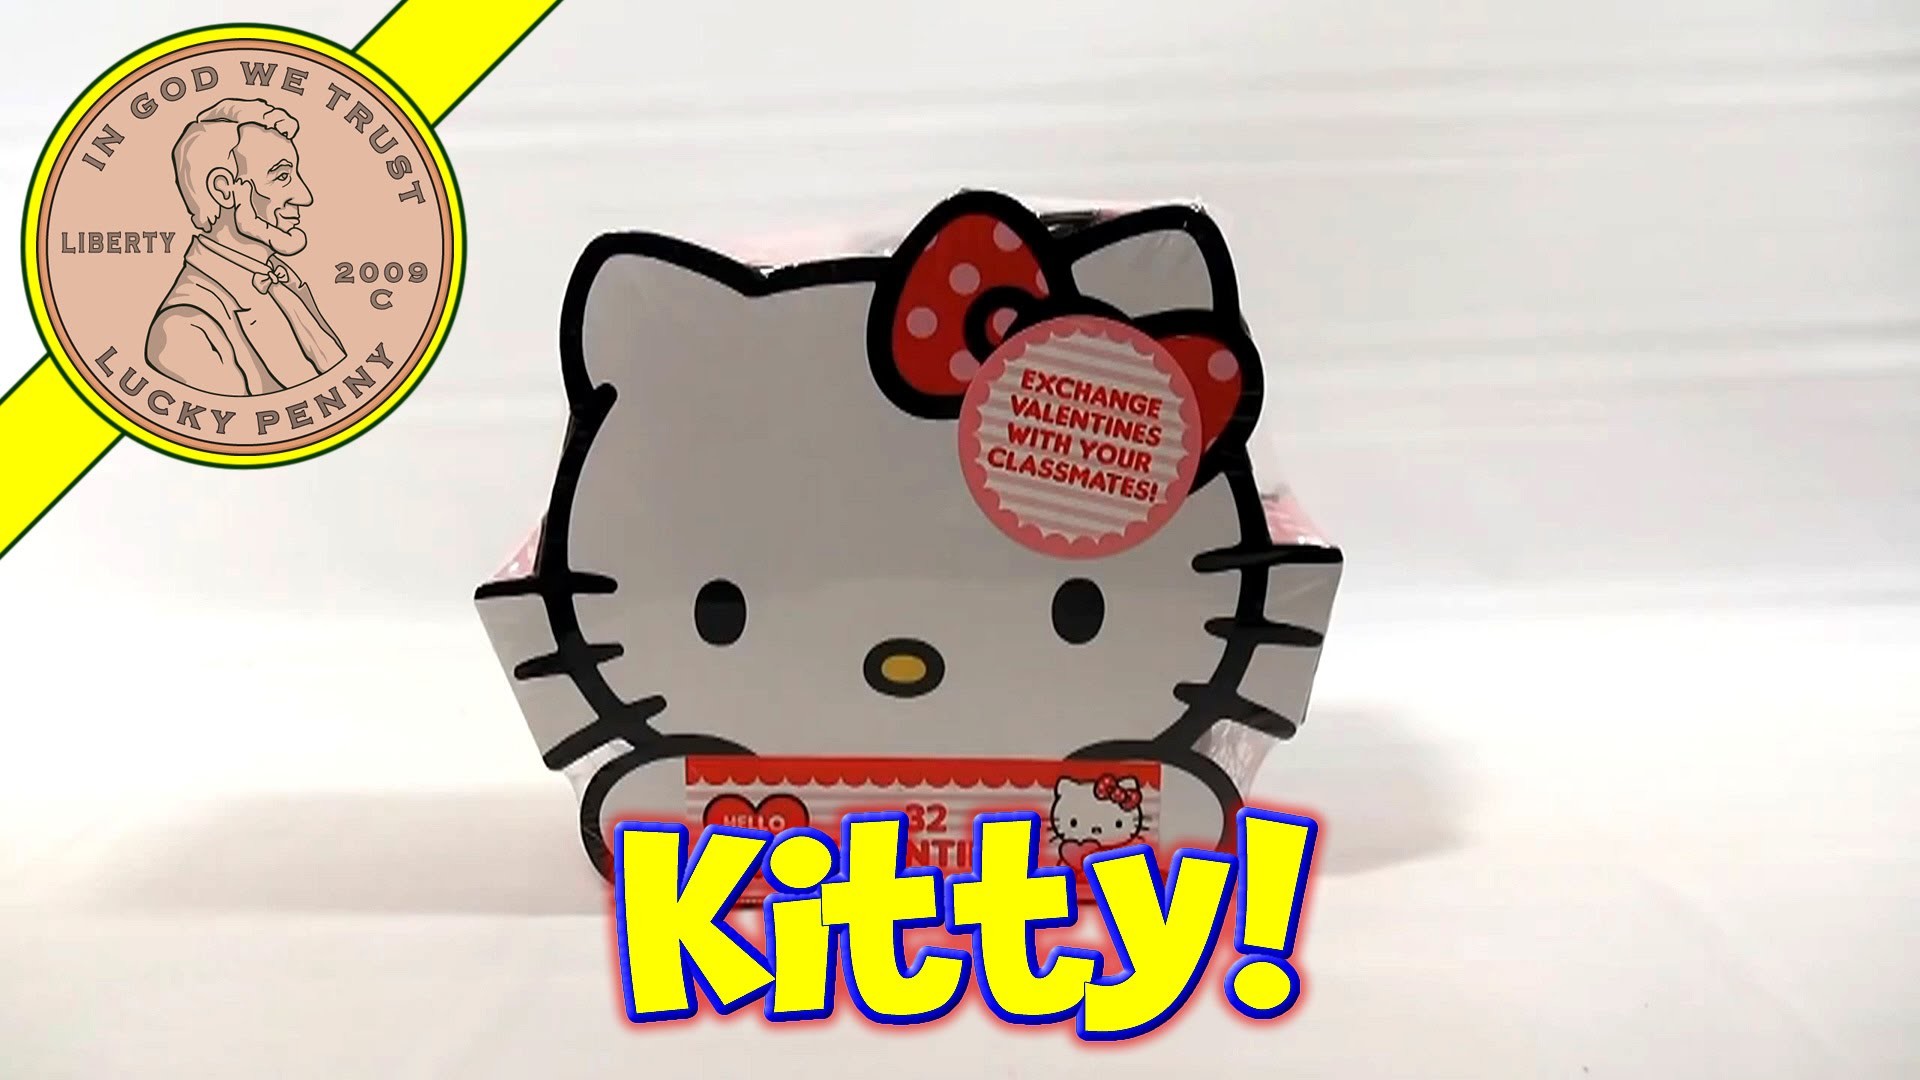 1920x1080 Hello Kitty Valentine's Day Box - 32 Valentines with 8 Cute Designs! -  YouTube